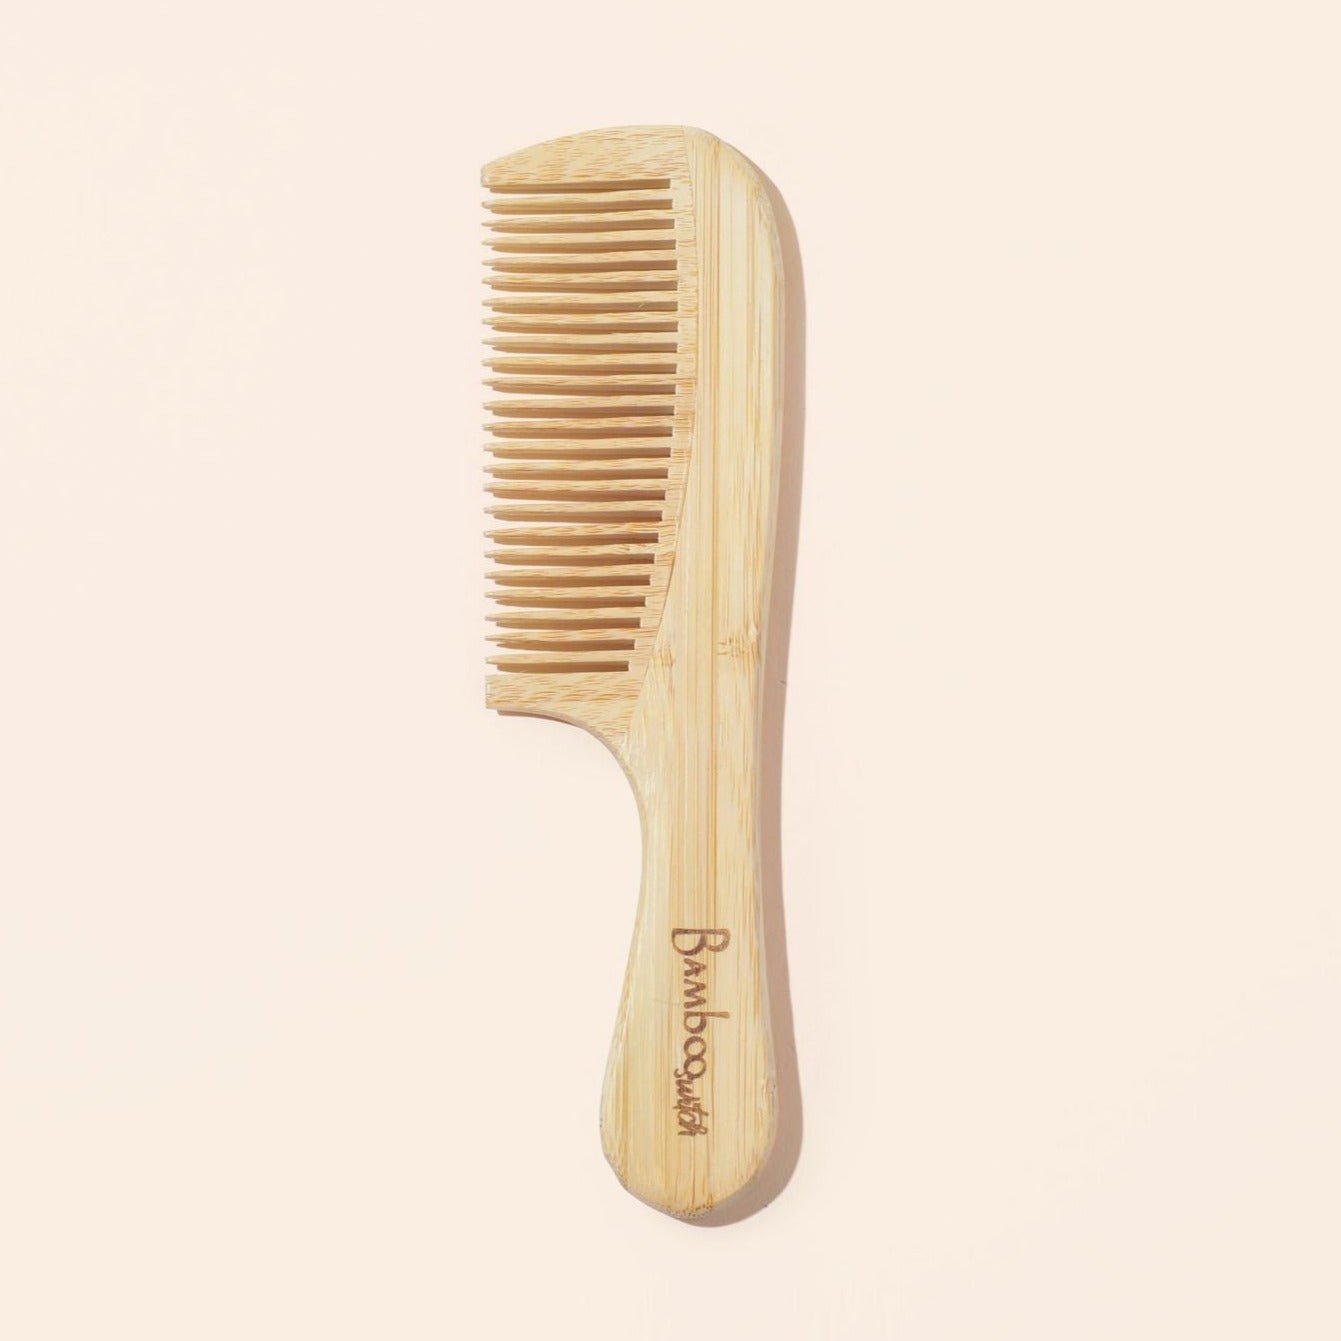 sustainable, zero waste, earth-friendly, plastic-free Natural Bamboo Comb with Handle - Bamboo Switch